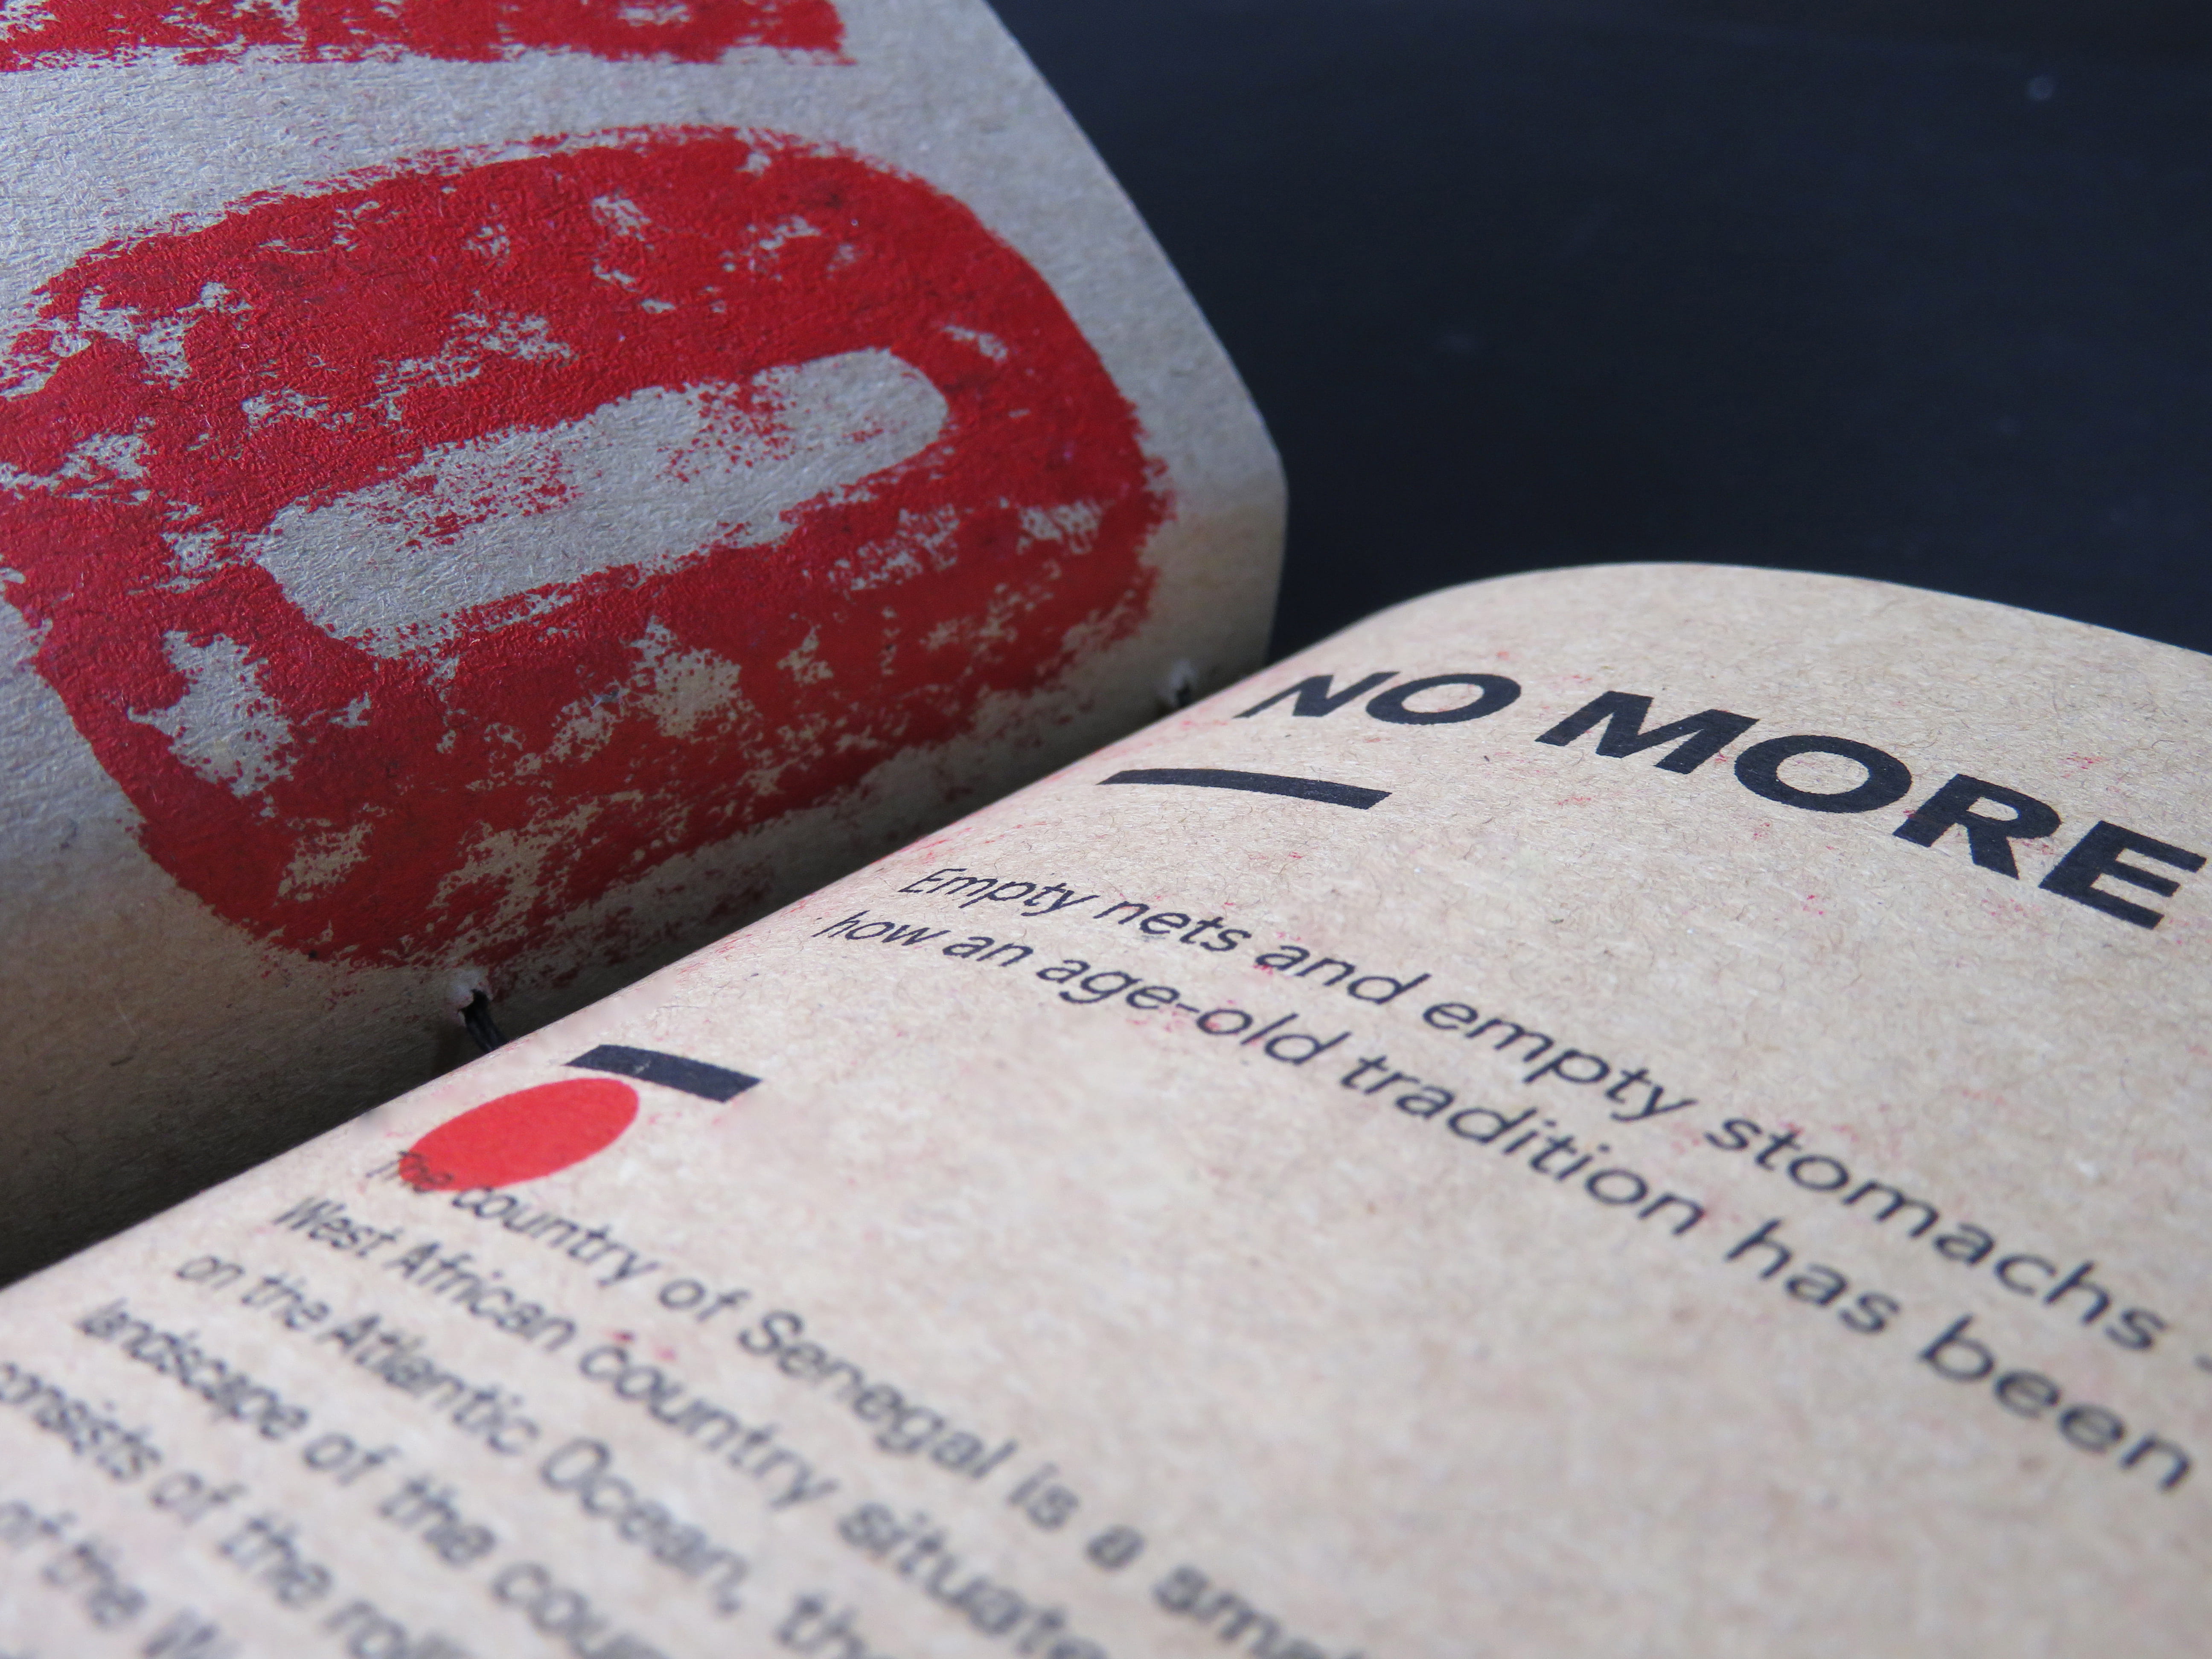 Close up of a book page showing the texture and type face